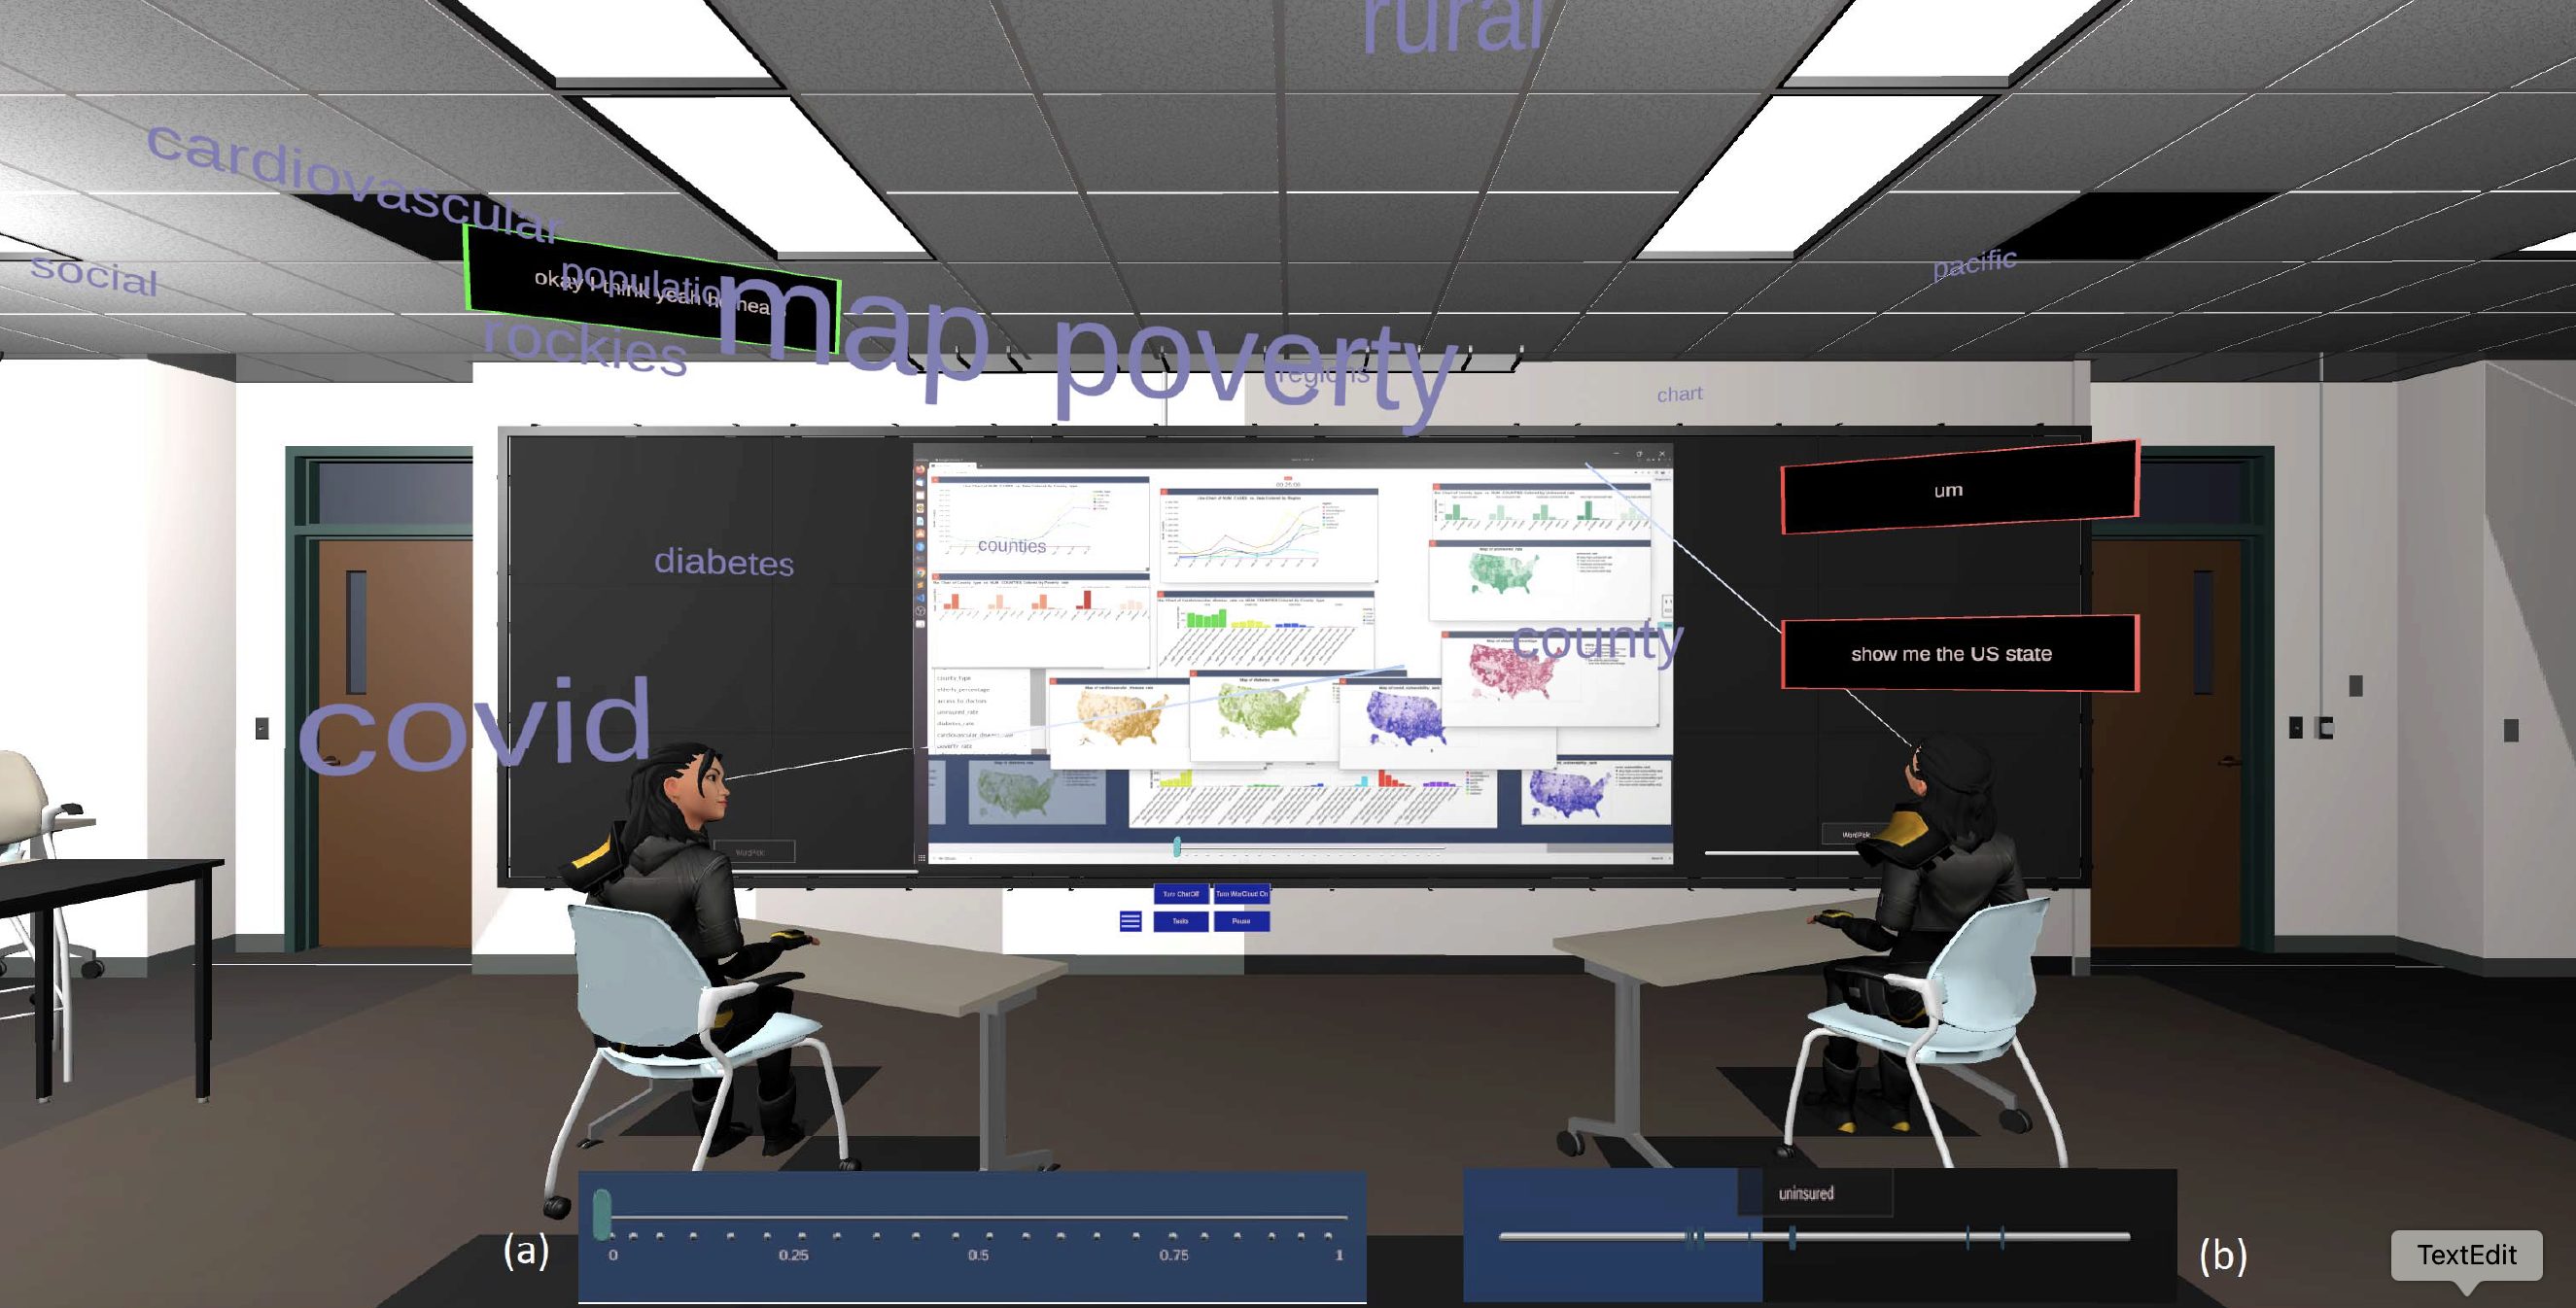 PSA is an immersive MR/VR framework for experiencing and analyzing recorded conversations and events. We see two participants represented as virtual avatars engaged in a conversation.